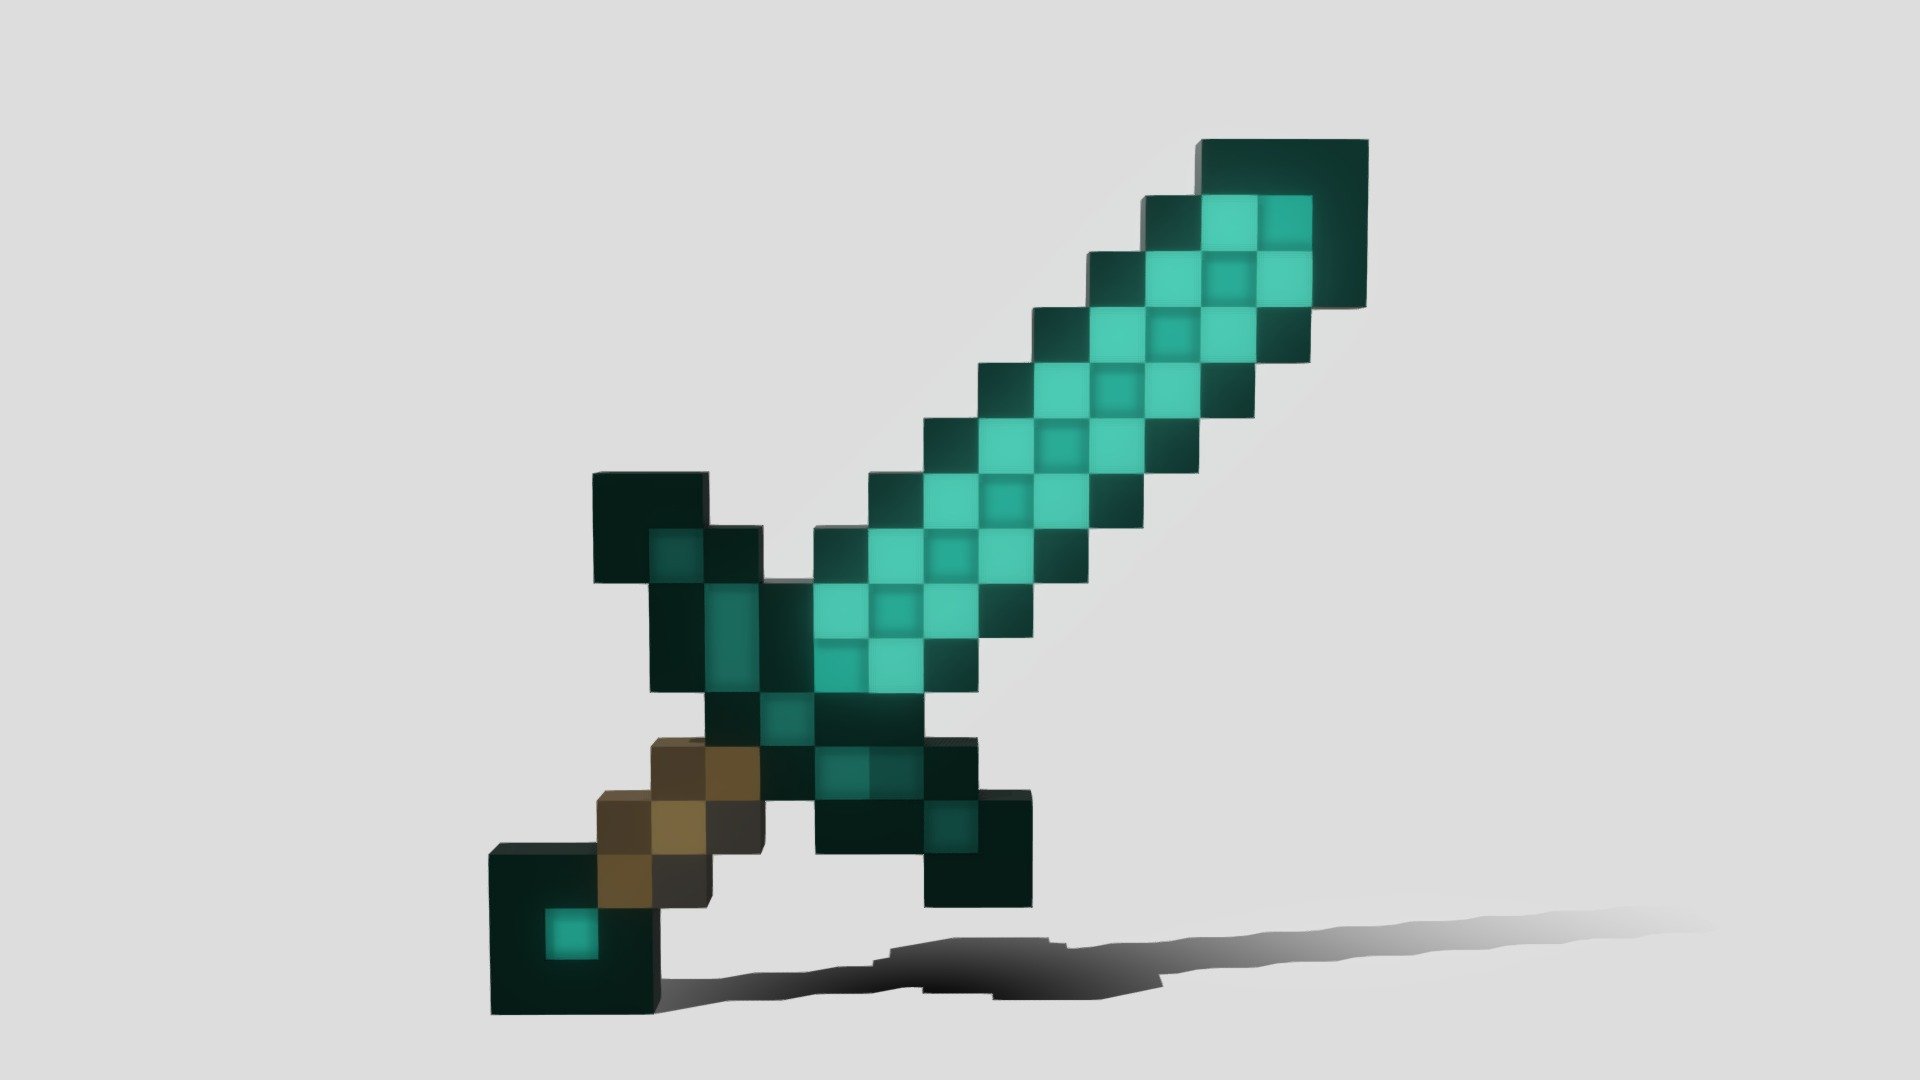 minecraft-sword-download-free-3d-model-by-solstice-try-523bb4c